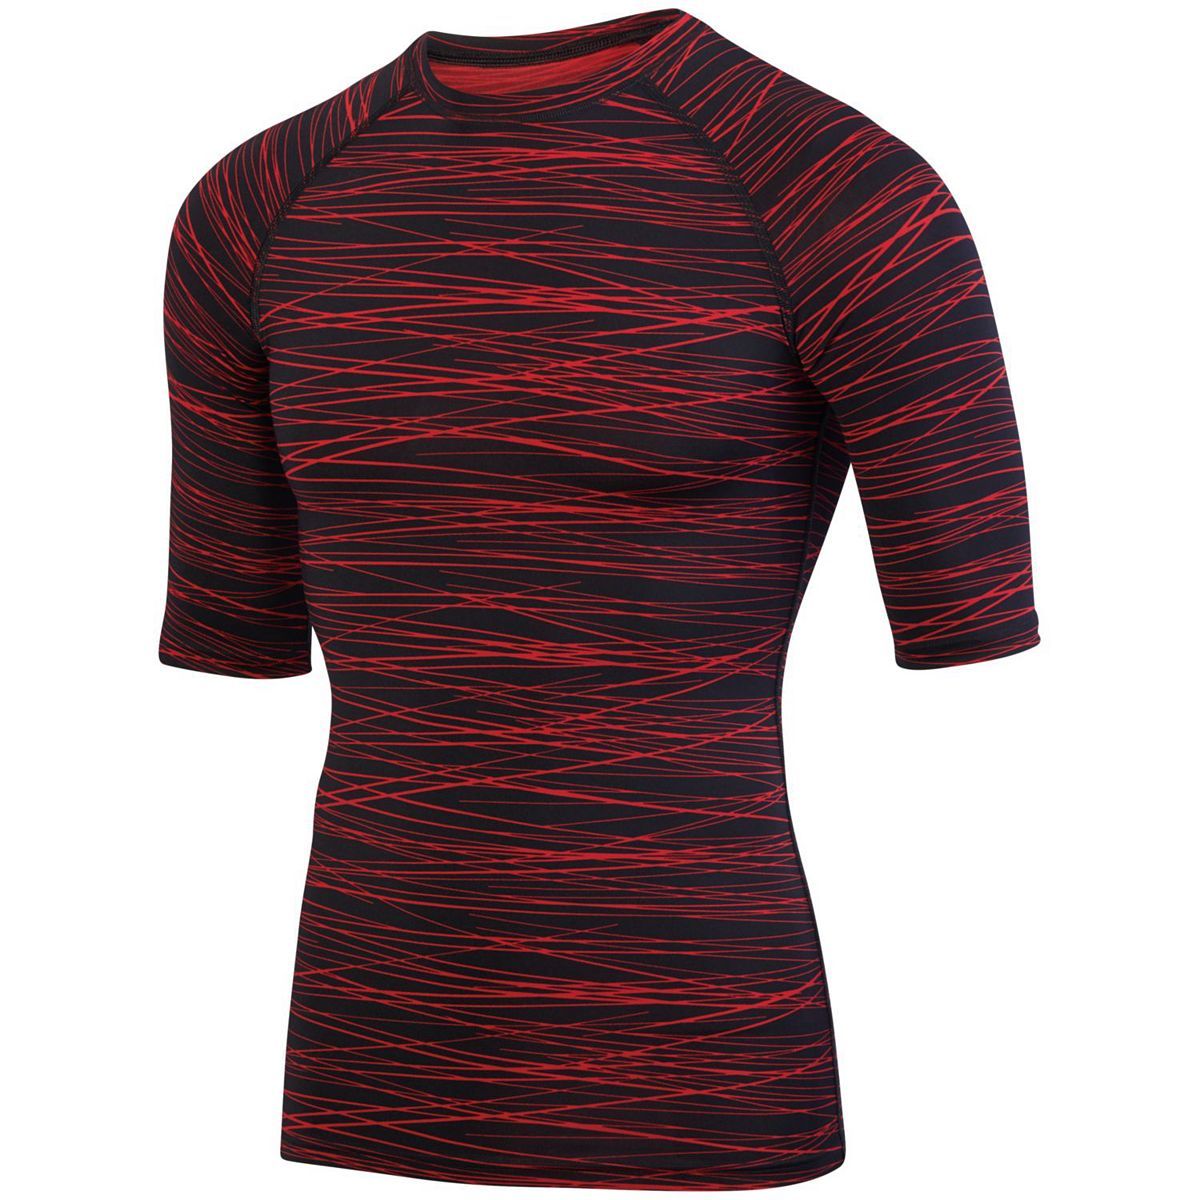 Augusta Sportswear Hyperform Compression Half Sleeve Tee in Black/Red Print  -Part of the Adult, Adult-Tee-Shirt, T-Shirts, Augusta-Products, Shirts product lines at KanaleyCreations.com